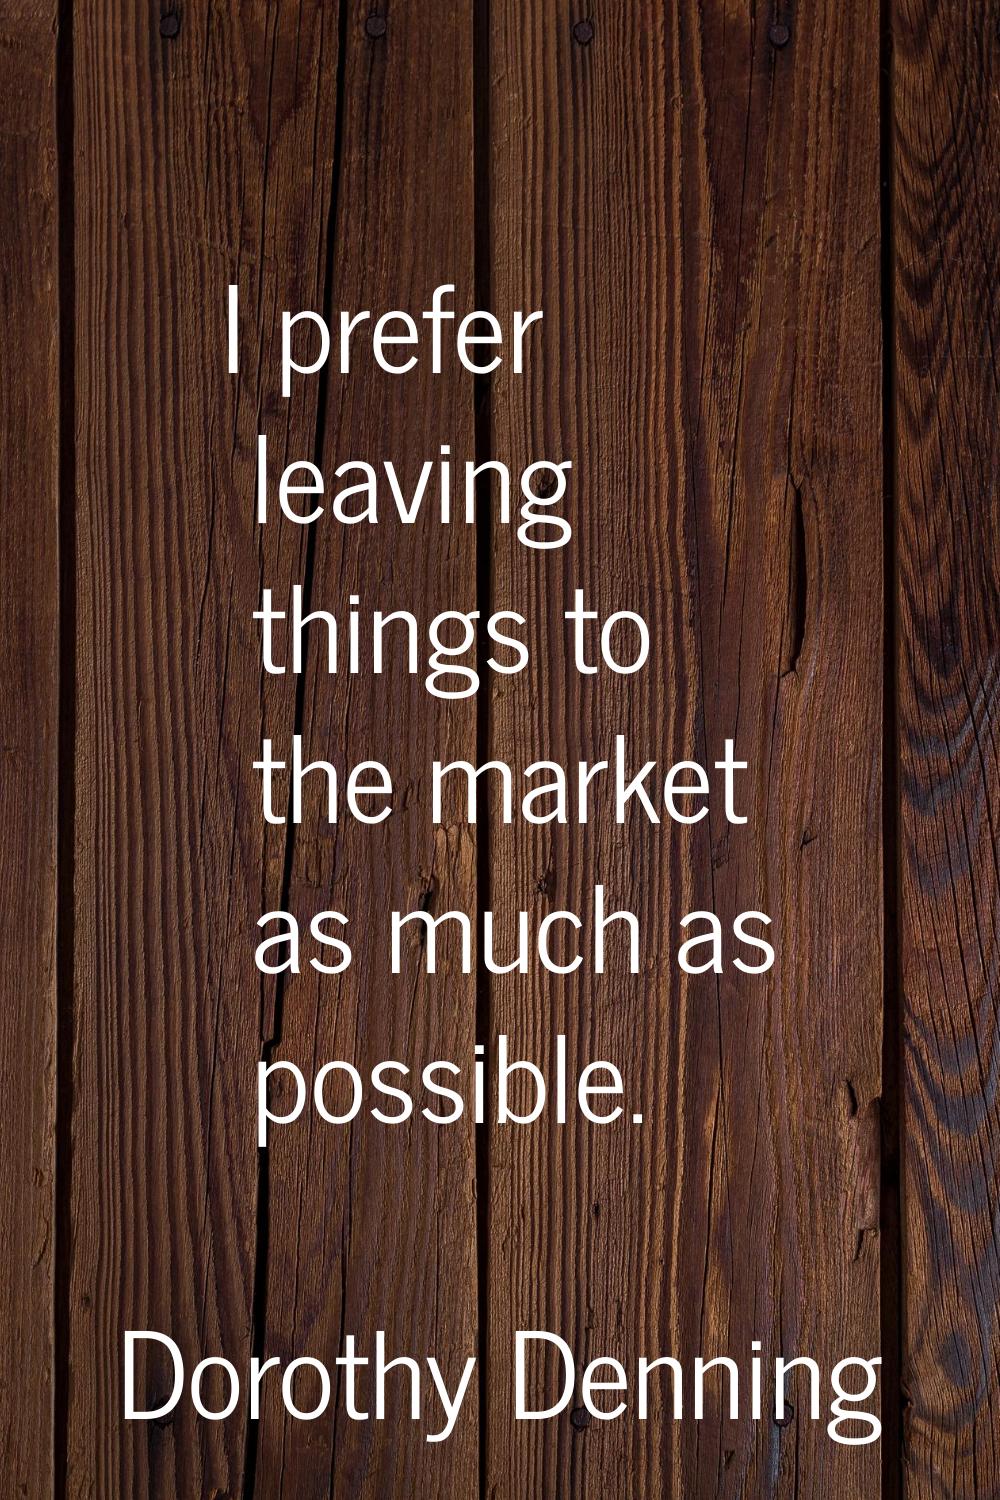 I prefer leaving things to the market as much as possible.